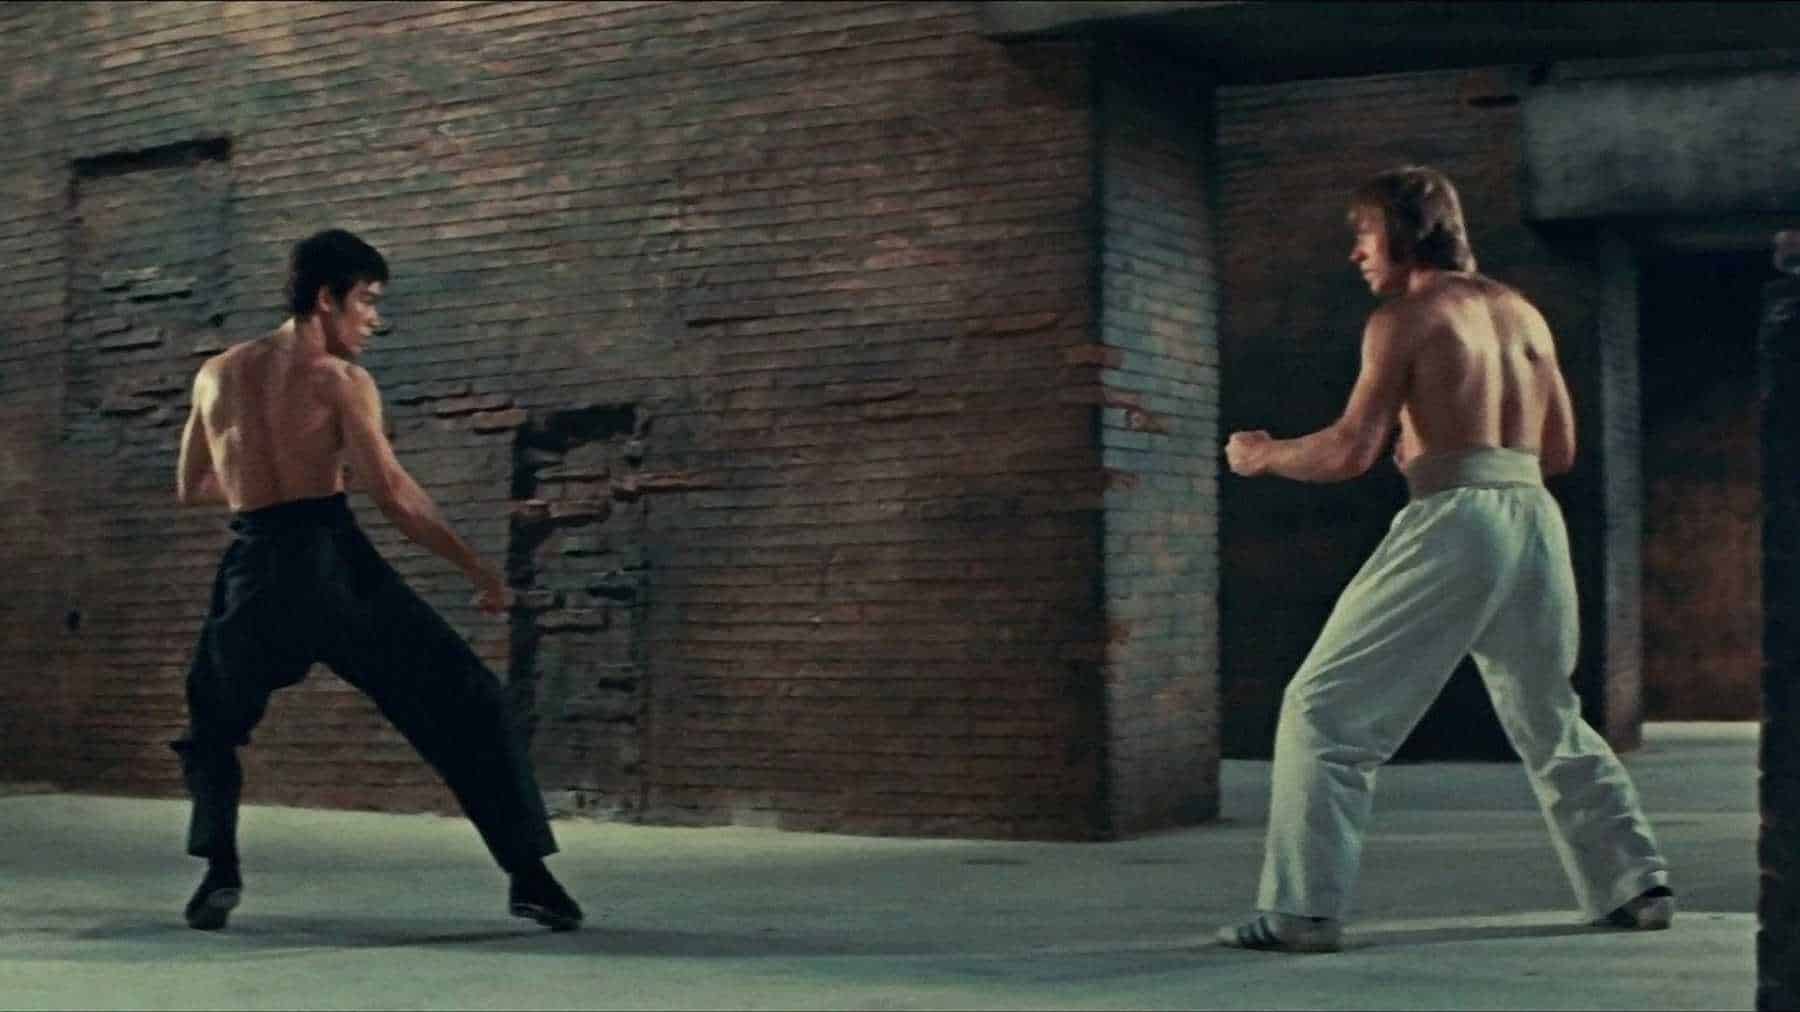 Film Review: Way of the Dragon (1972) by Bruce Lee